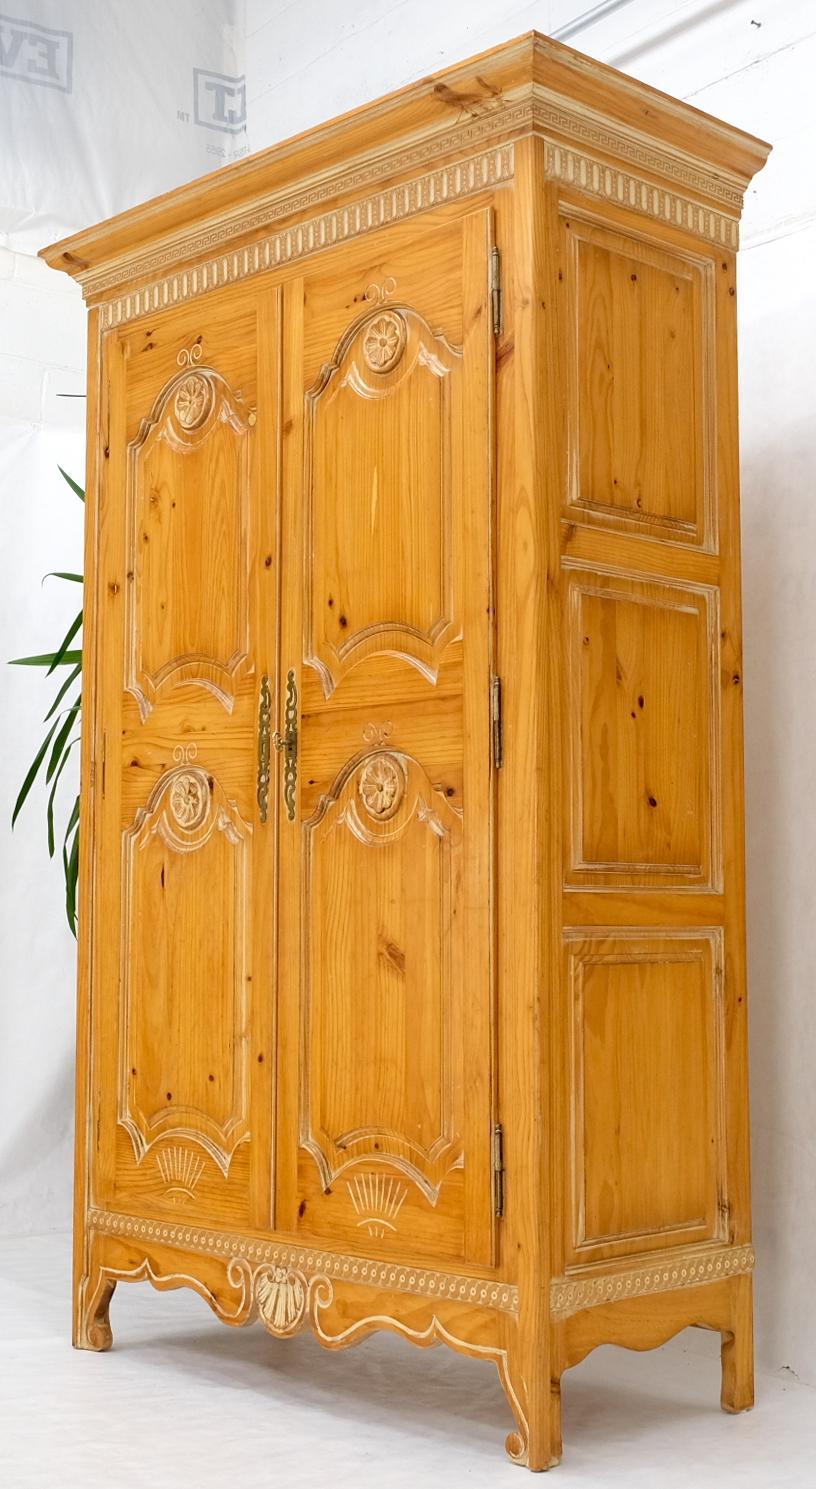 Country French Pine Wardrobe Storage Cabinet In Good Condition For Sale In Rockaway, NJ